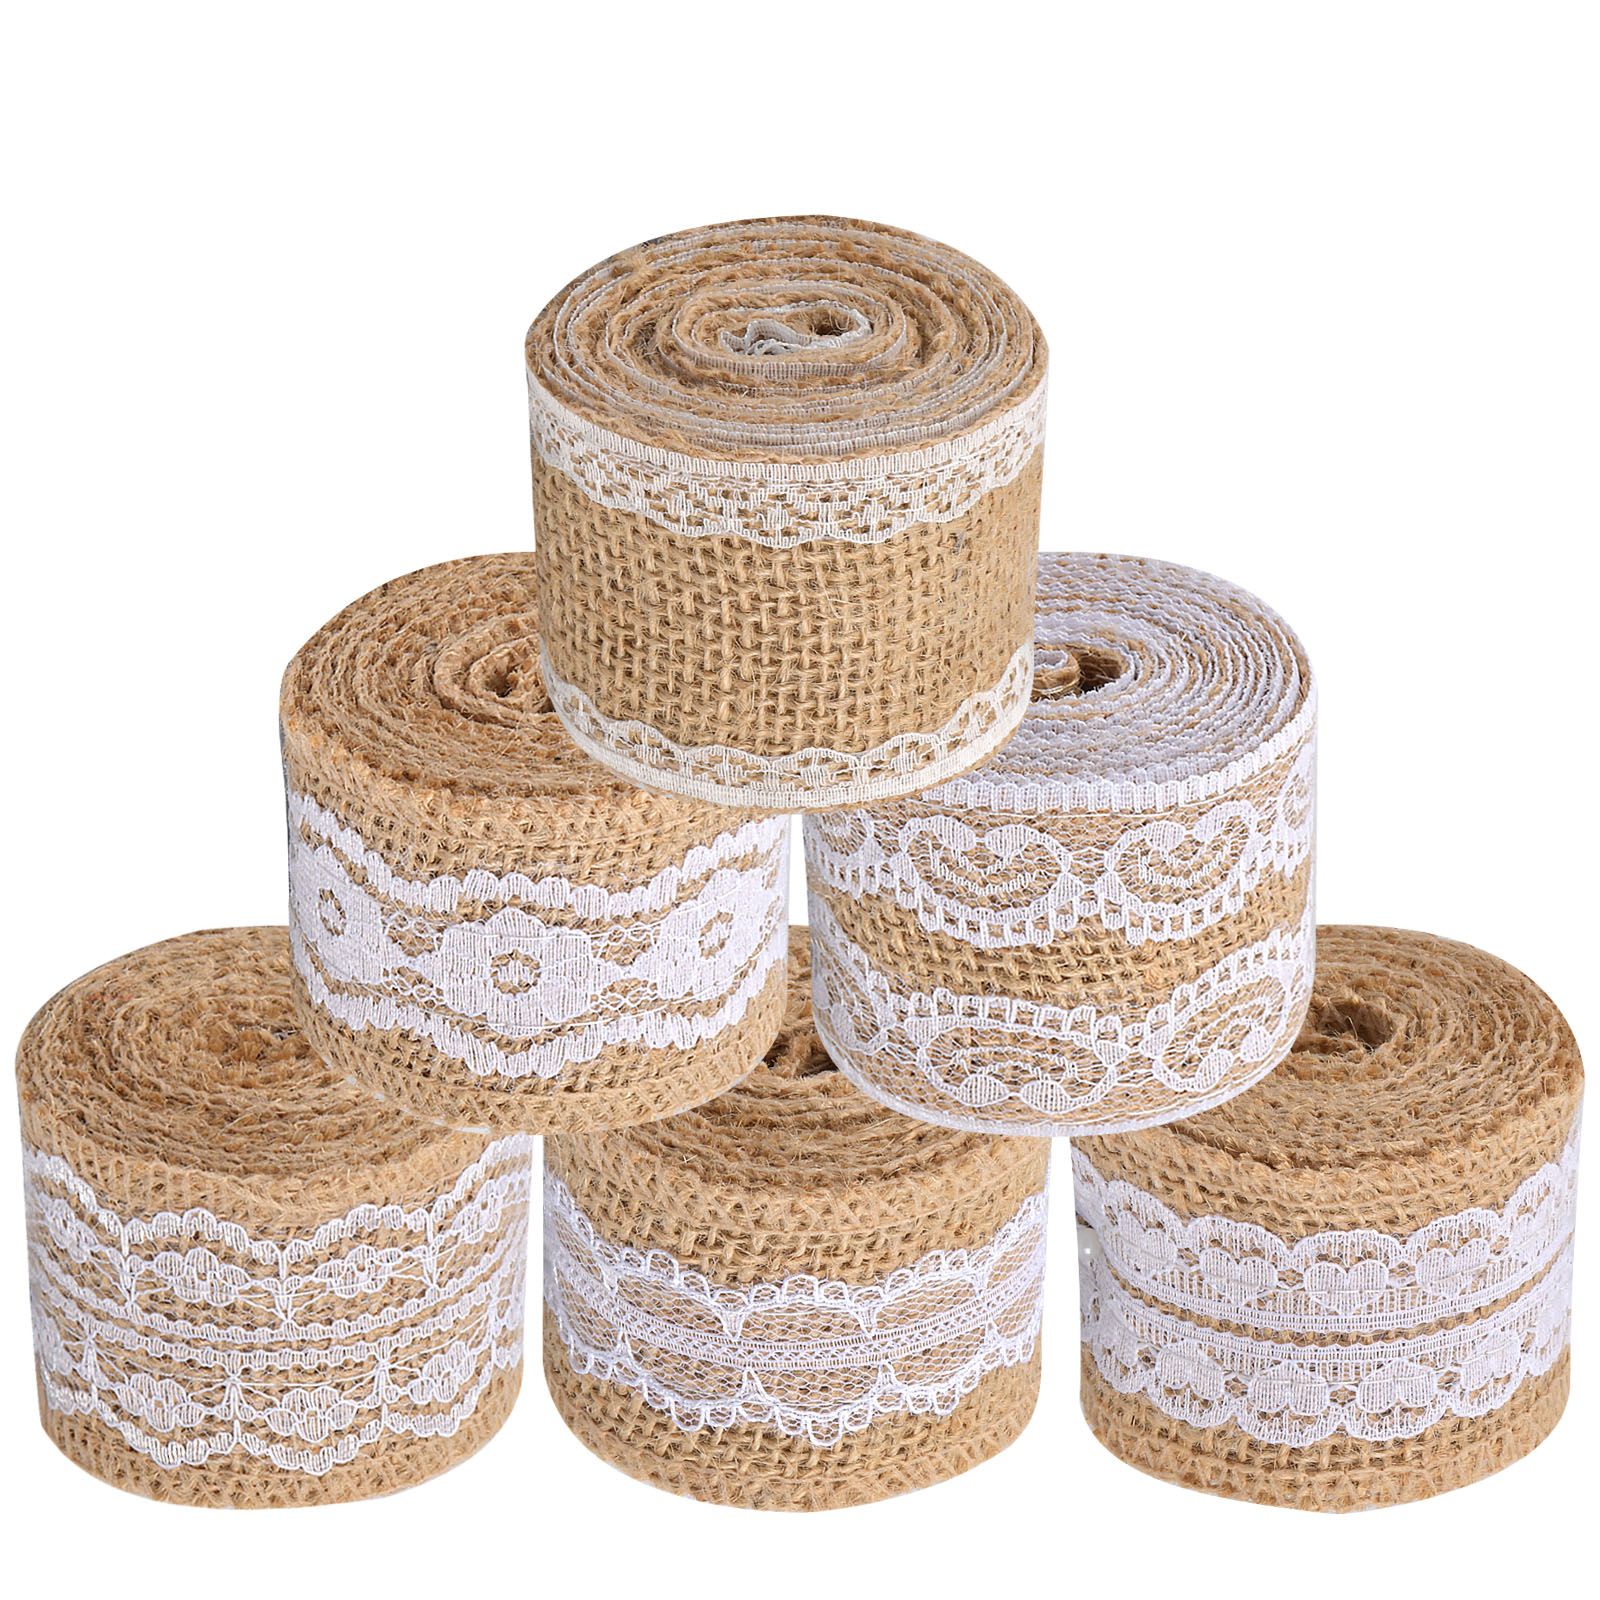 2meter Jute Burlap Rolls Hessian Ribbon With Lace Roll Vintage Rustic  Wedding Decoration Burlap Wedding Cake Topper Diy Ornament - Party &  Holiday Diy Decorations - AliExpress